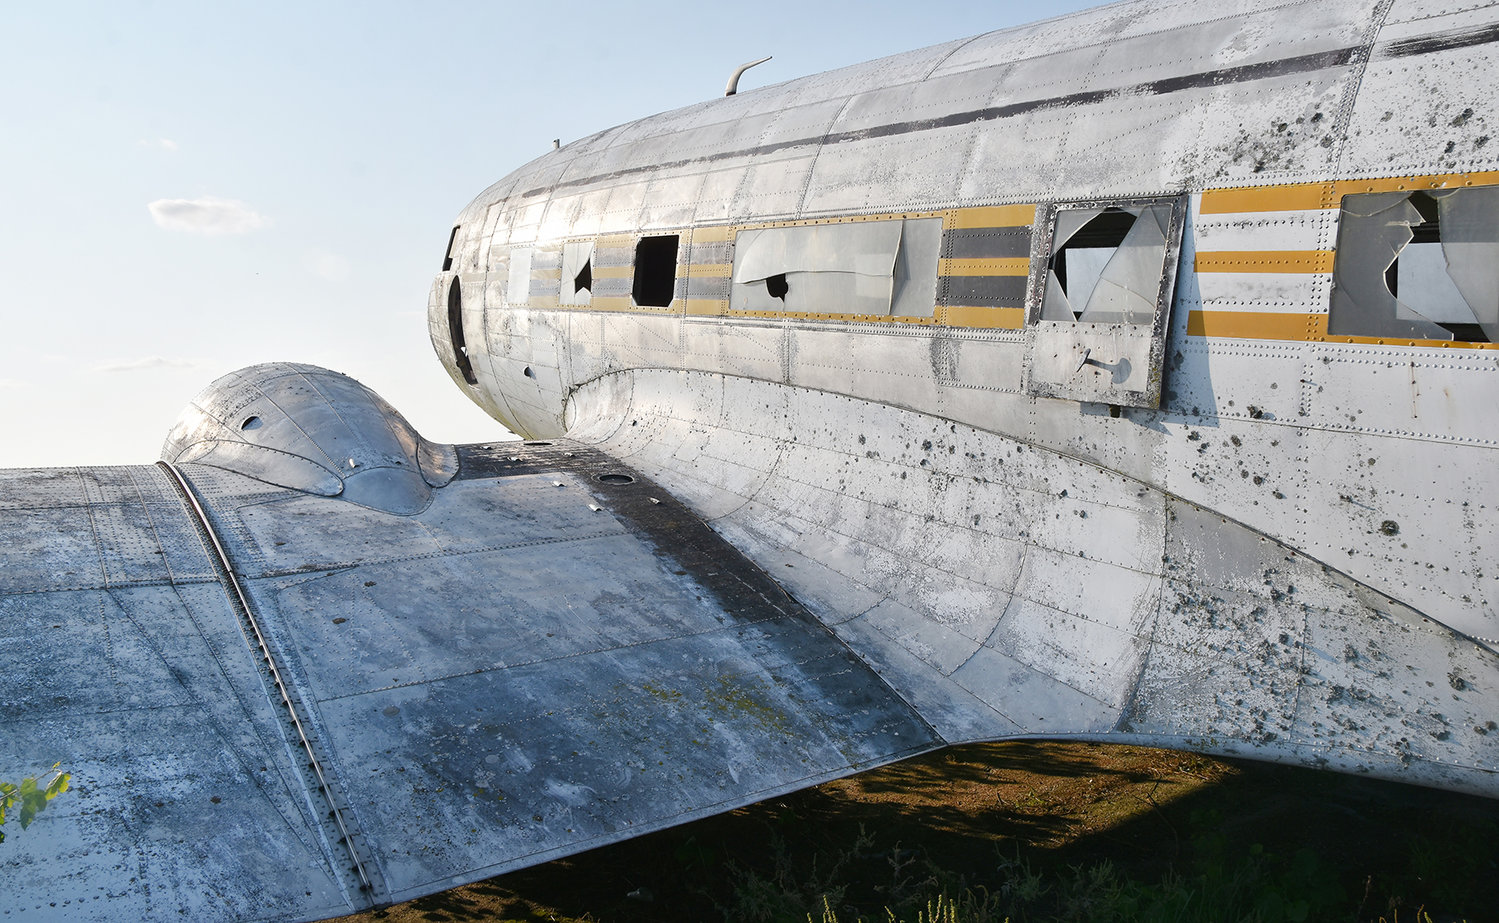 The third DC3 airplane has been stripped down, cleaned and is waiting for its next adventure.